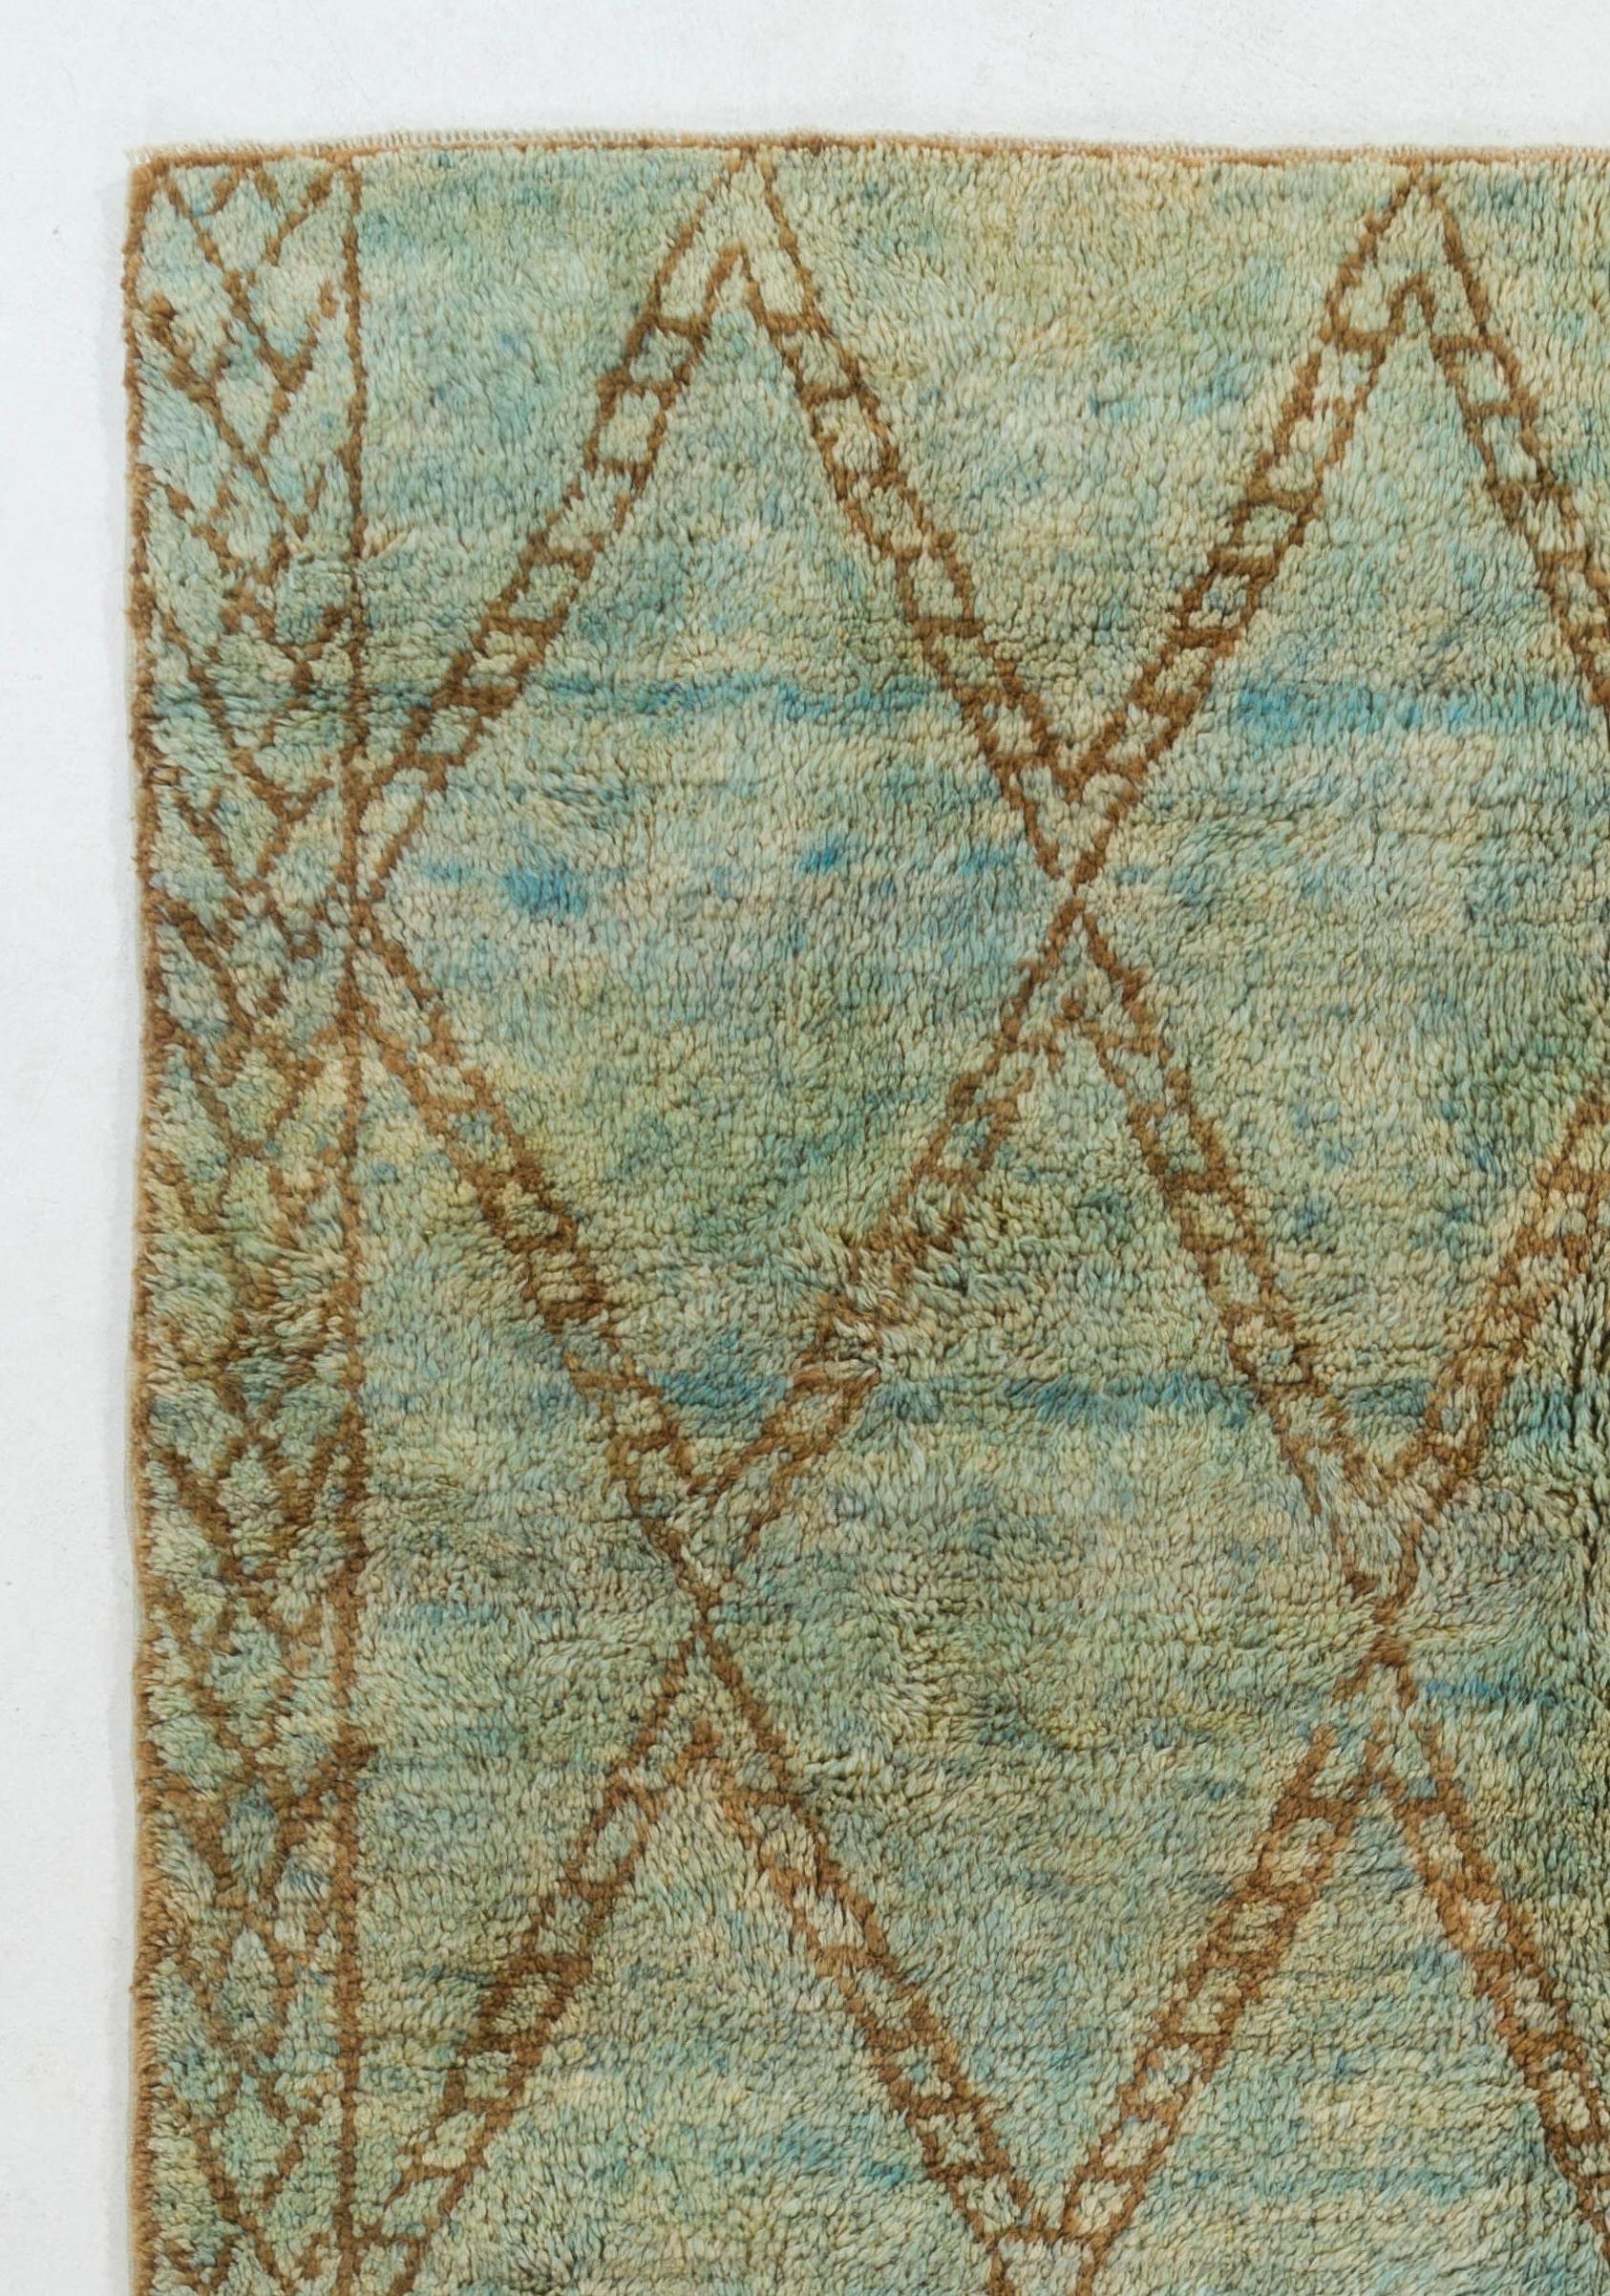 A Moroccan Berber design contemporary hand-knotted area rug made of organic wool in a sophisticated, warm and earthy color palette of olive green, brown and light blue. It features an all-over design of lozenge-shaped, wide-edged lattices and two